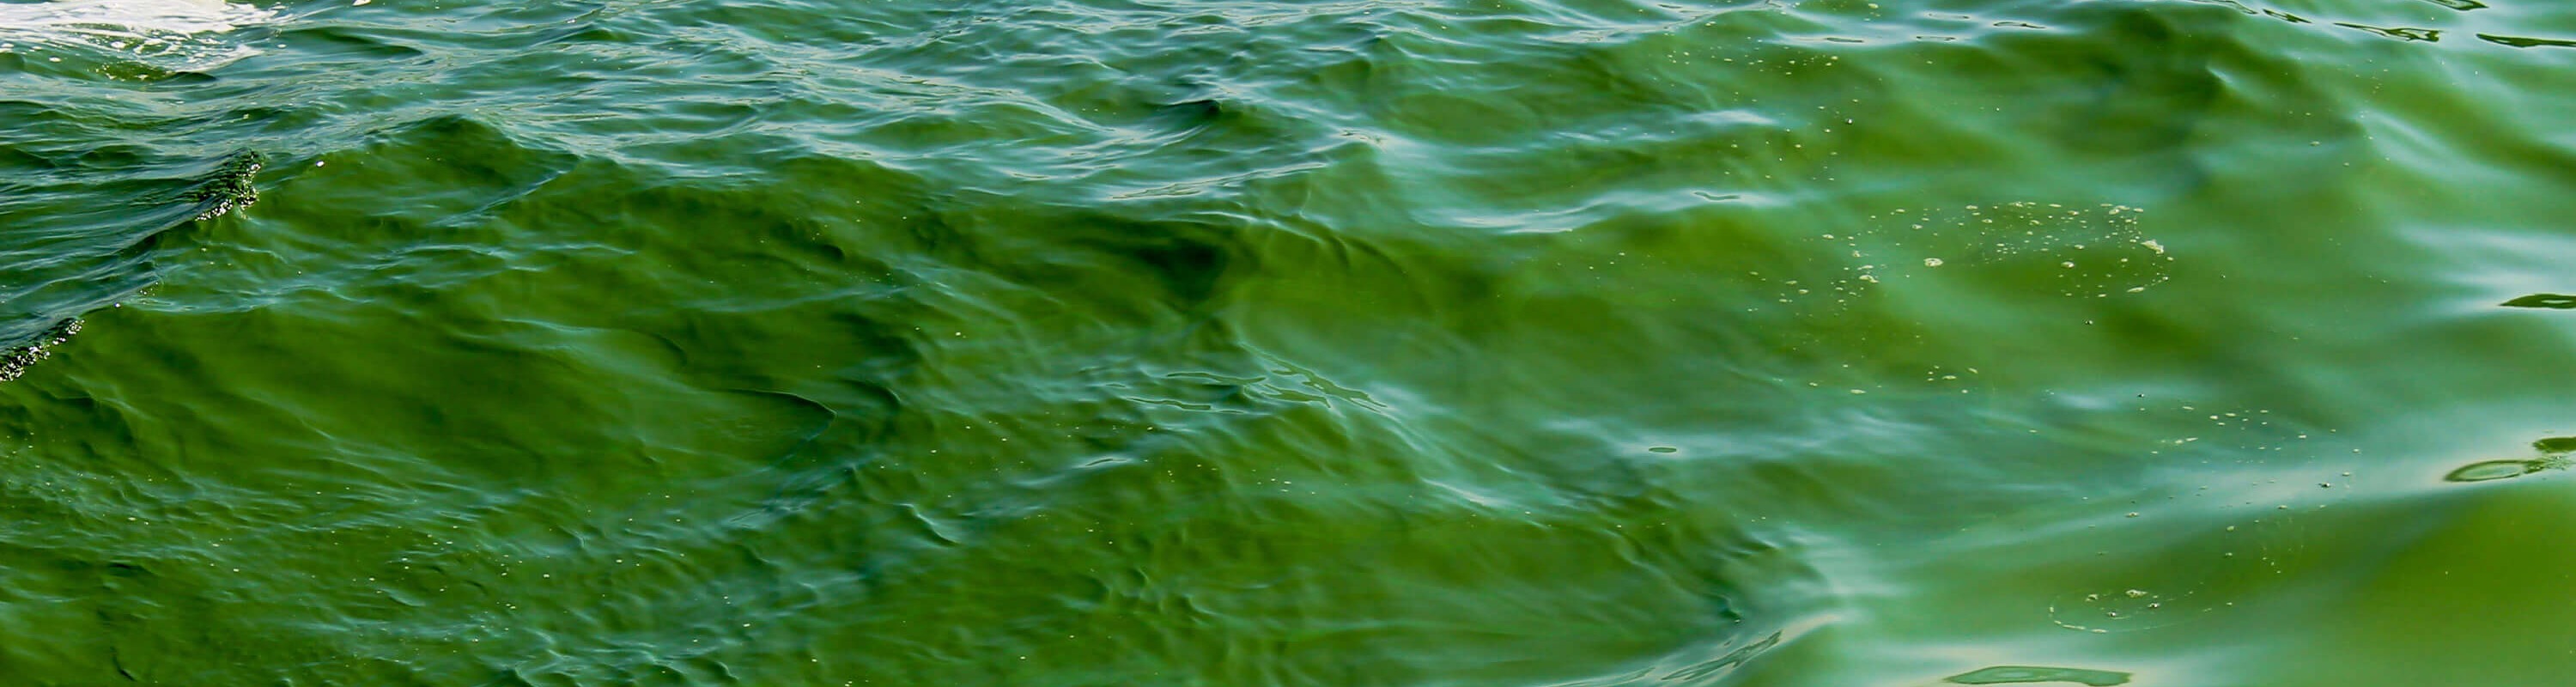 Close up of green seawater